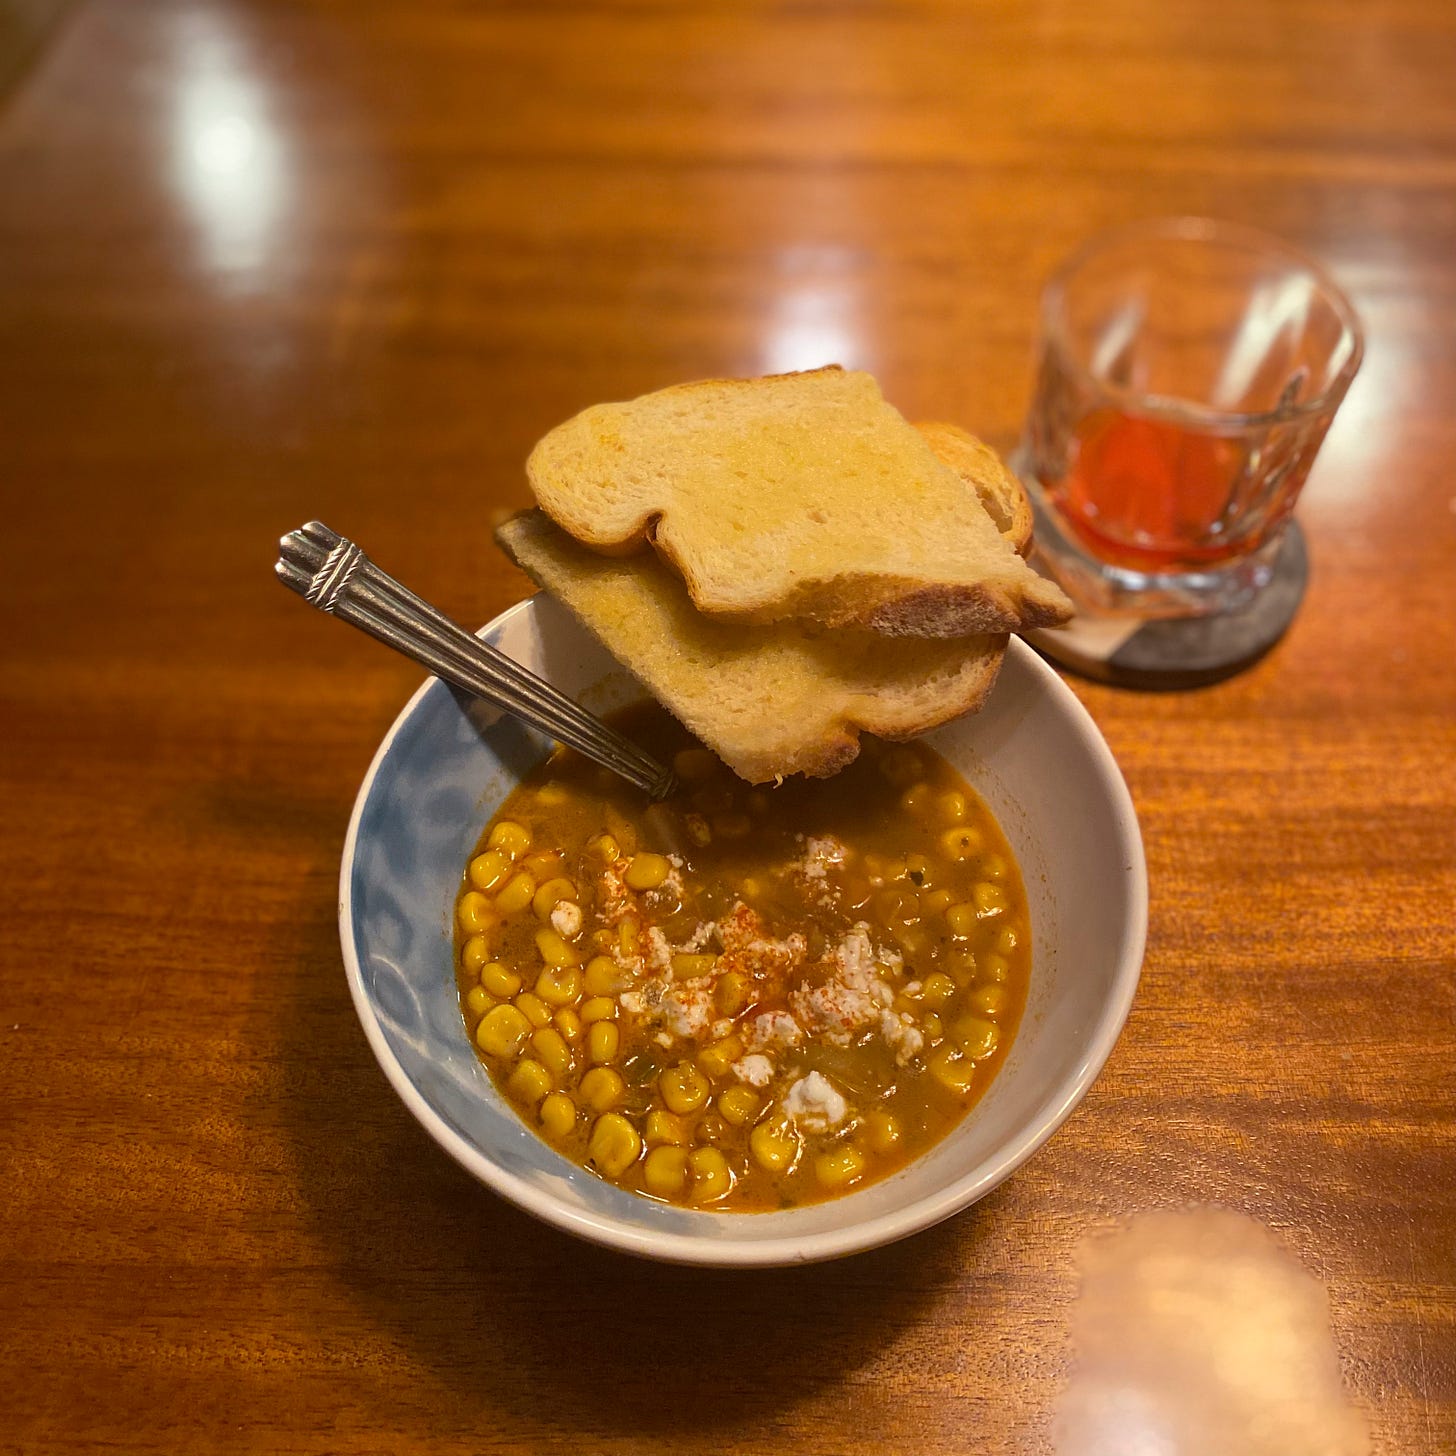 A chunky corn chowder with orangeish broth and crumbles of feta on top. On the edge of the bowl are two halves of a slice of toast, and on a coaster is a mostly-empty rocks glass that had a boulevardier in it.